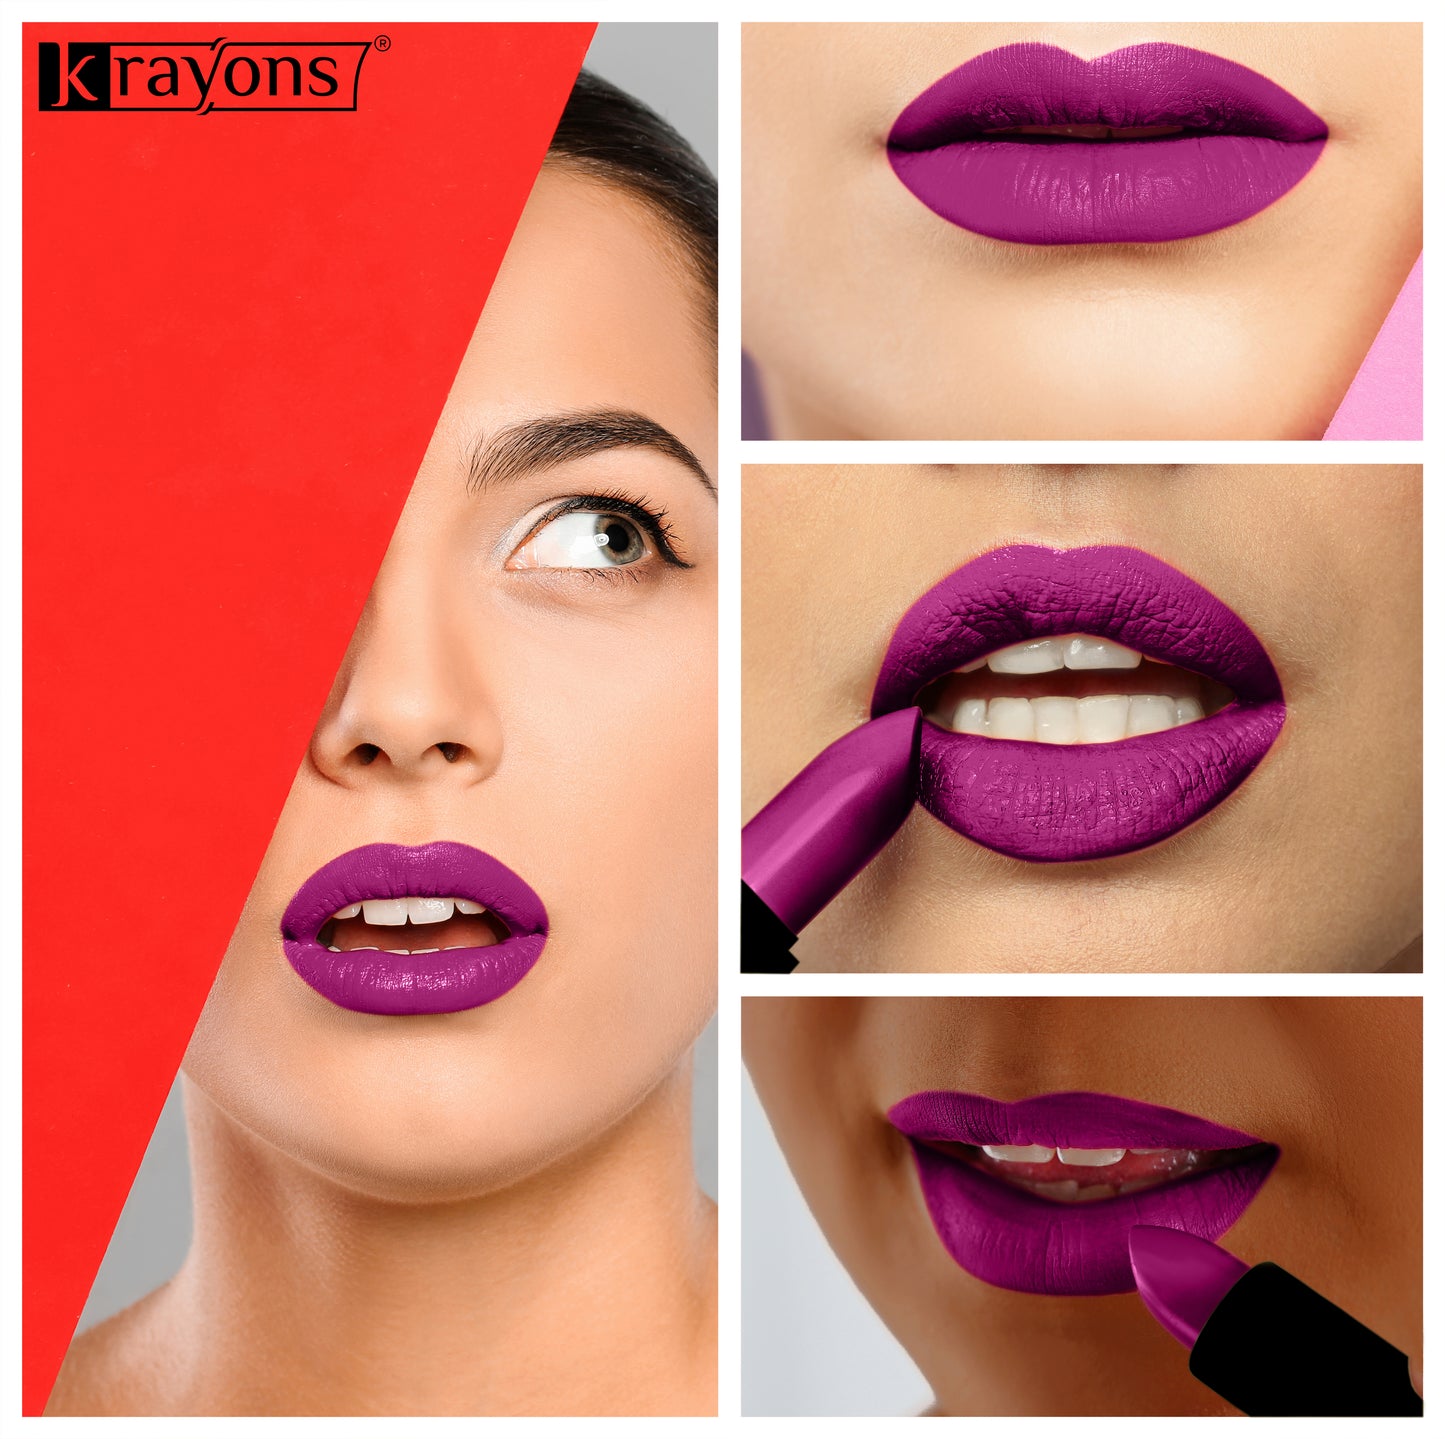 Krayons Cute  Matte Lipstick, Waterproof, Longlasting, 3.5gm Each, Pack of 3 (Brick Tone, French Rose, Centre Stage)